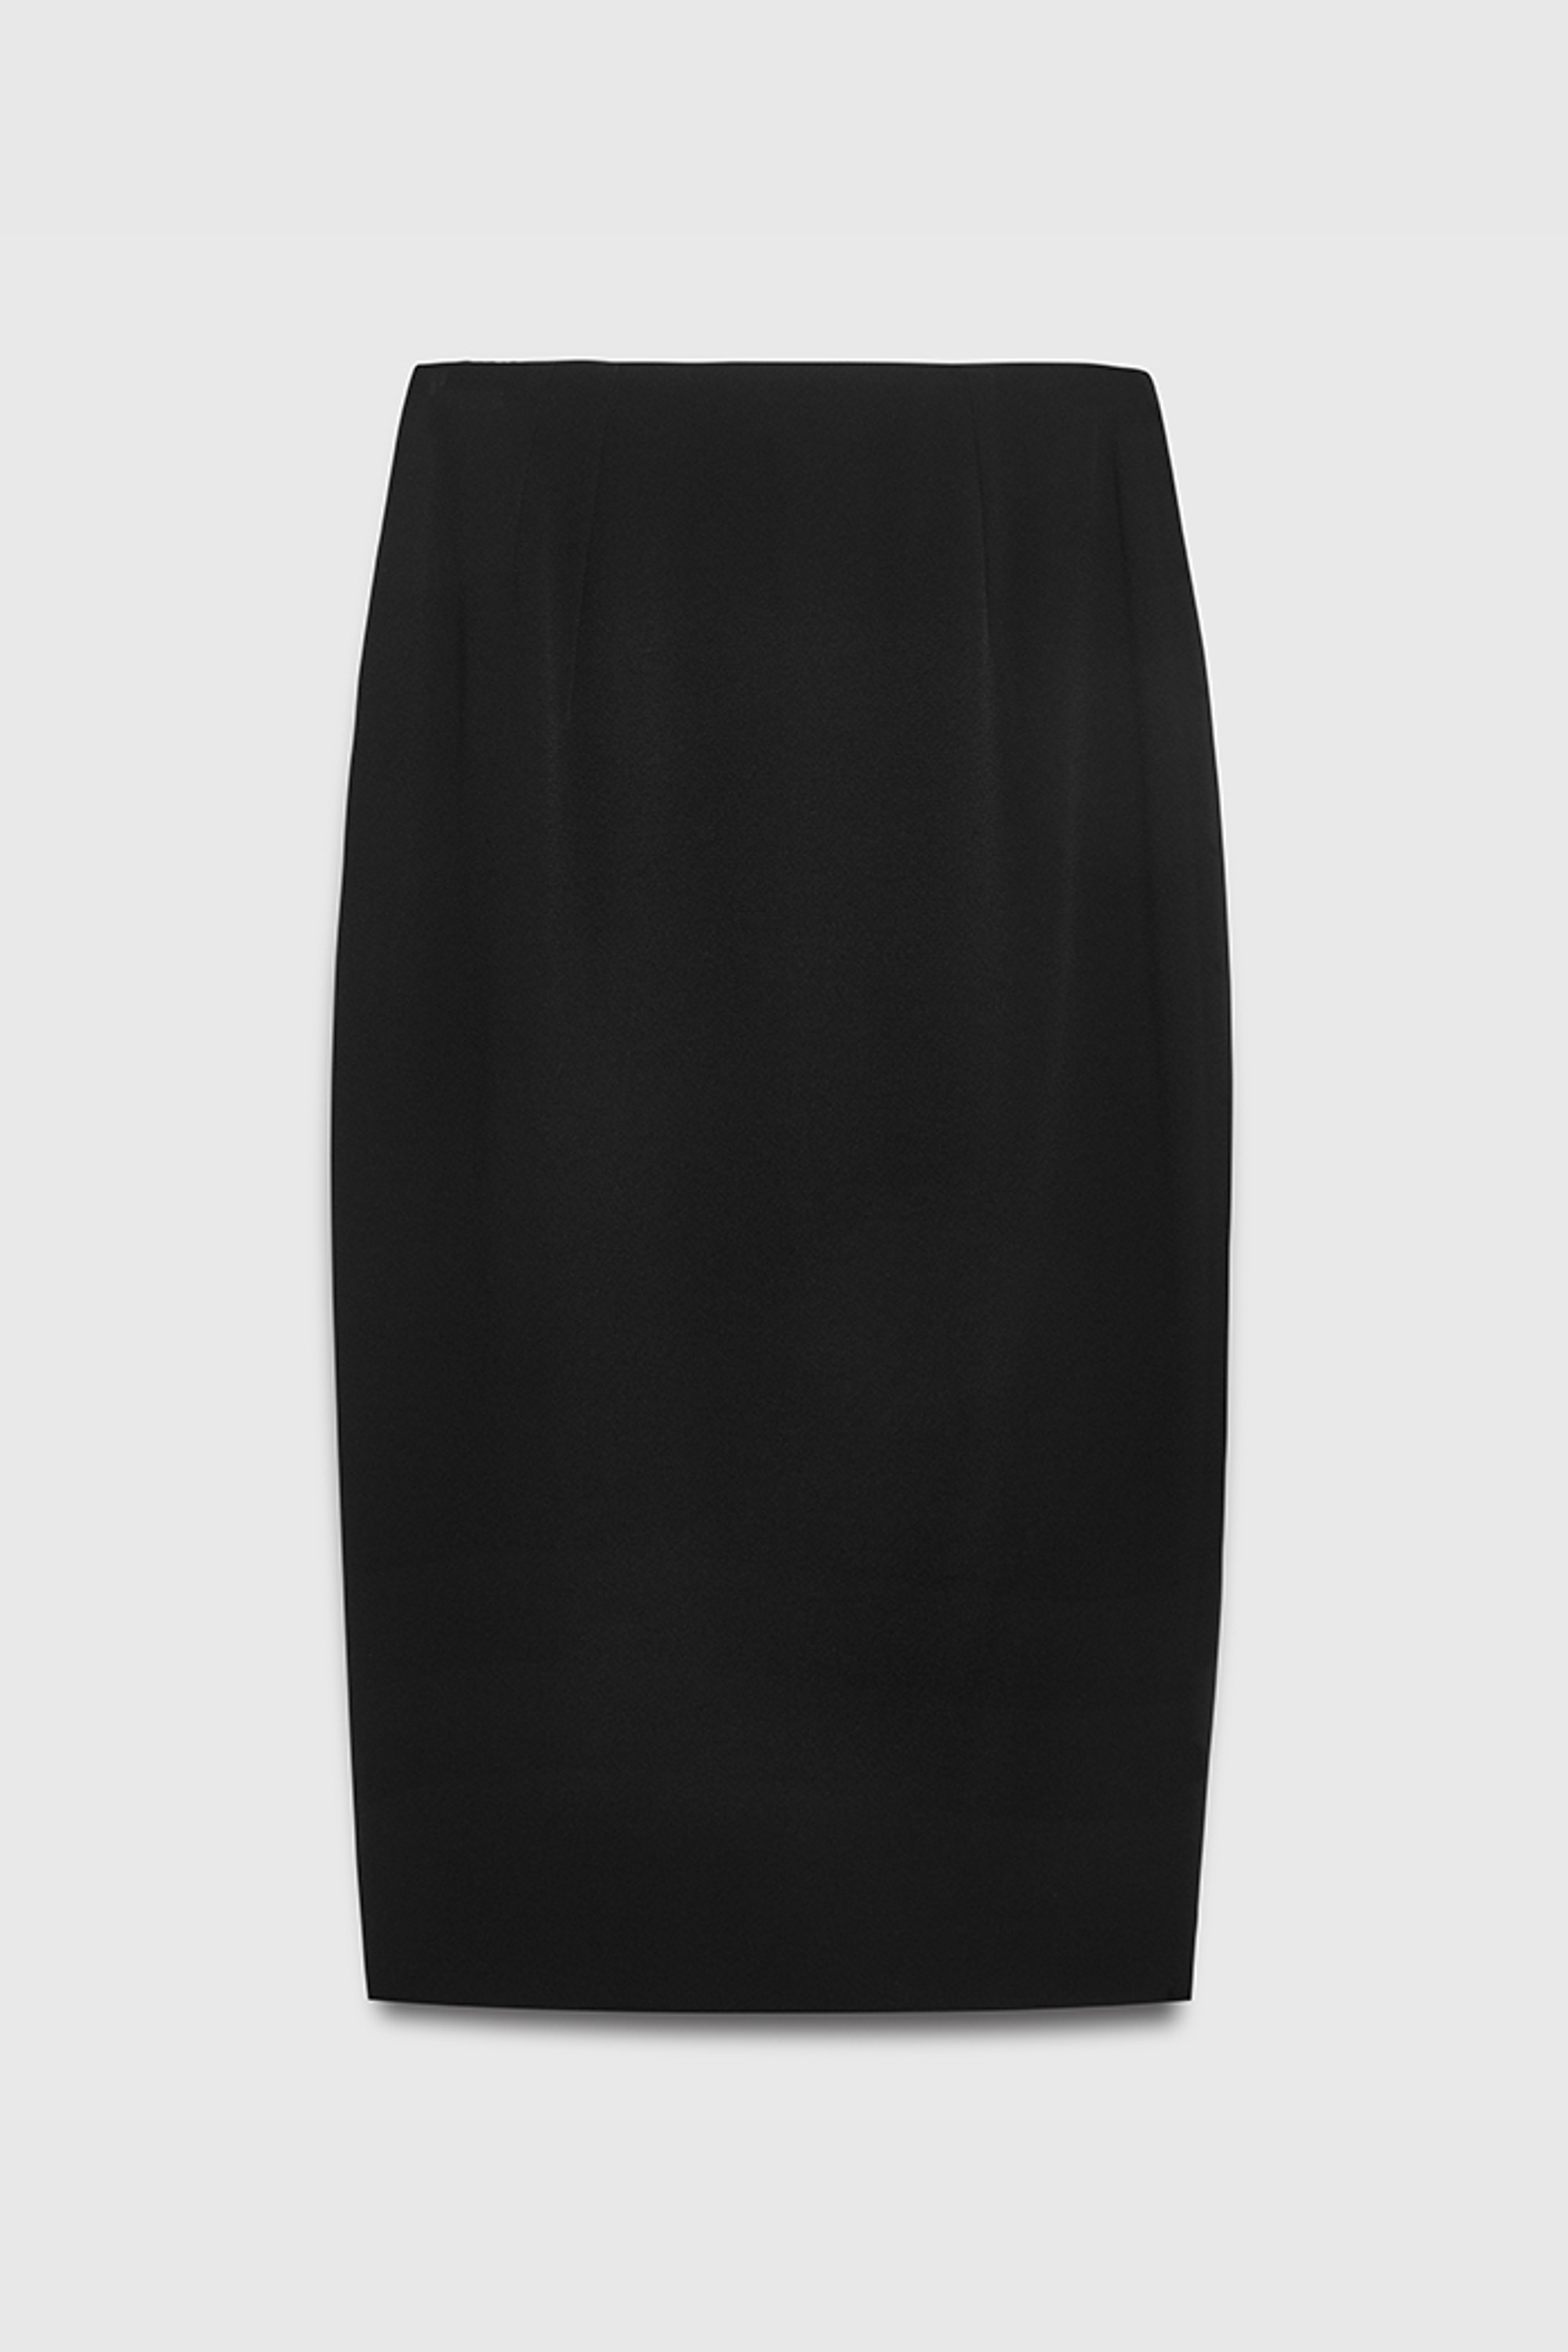 Clever Crepe Pencil Skirt Black - Welcome to the Fold LTD